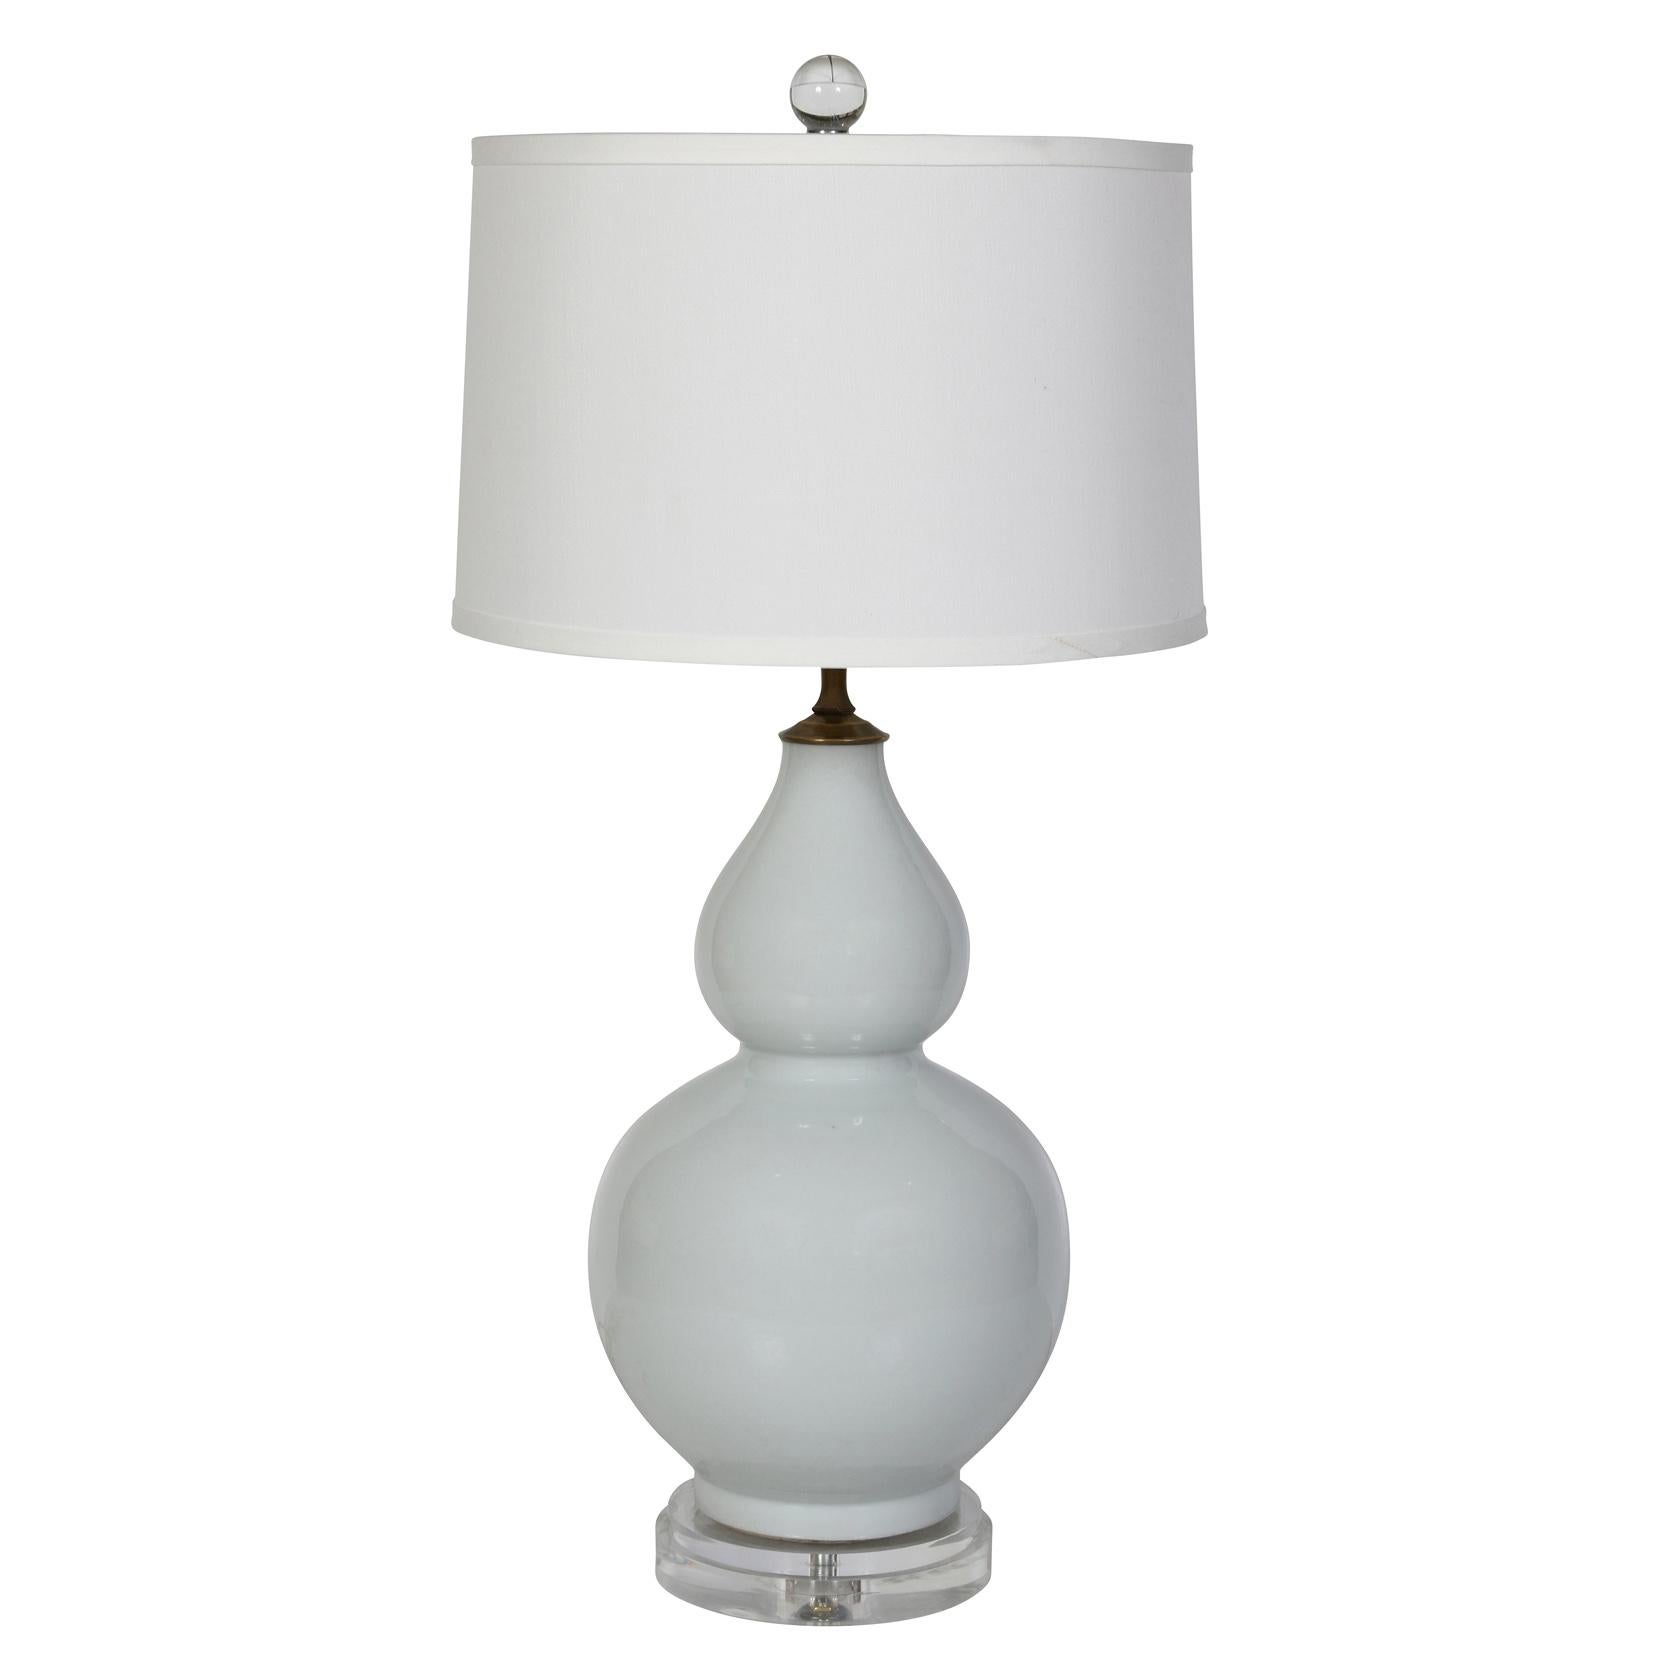 A pair of light gray double gourd  shaped ceramic lamps on a lucite base with a white linen shade.   Simple and elegant, the neutral color of the lamps allow them to go with any color scheme.